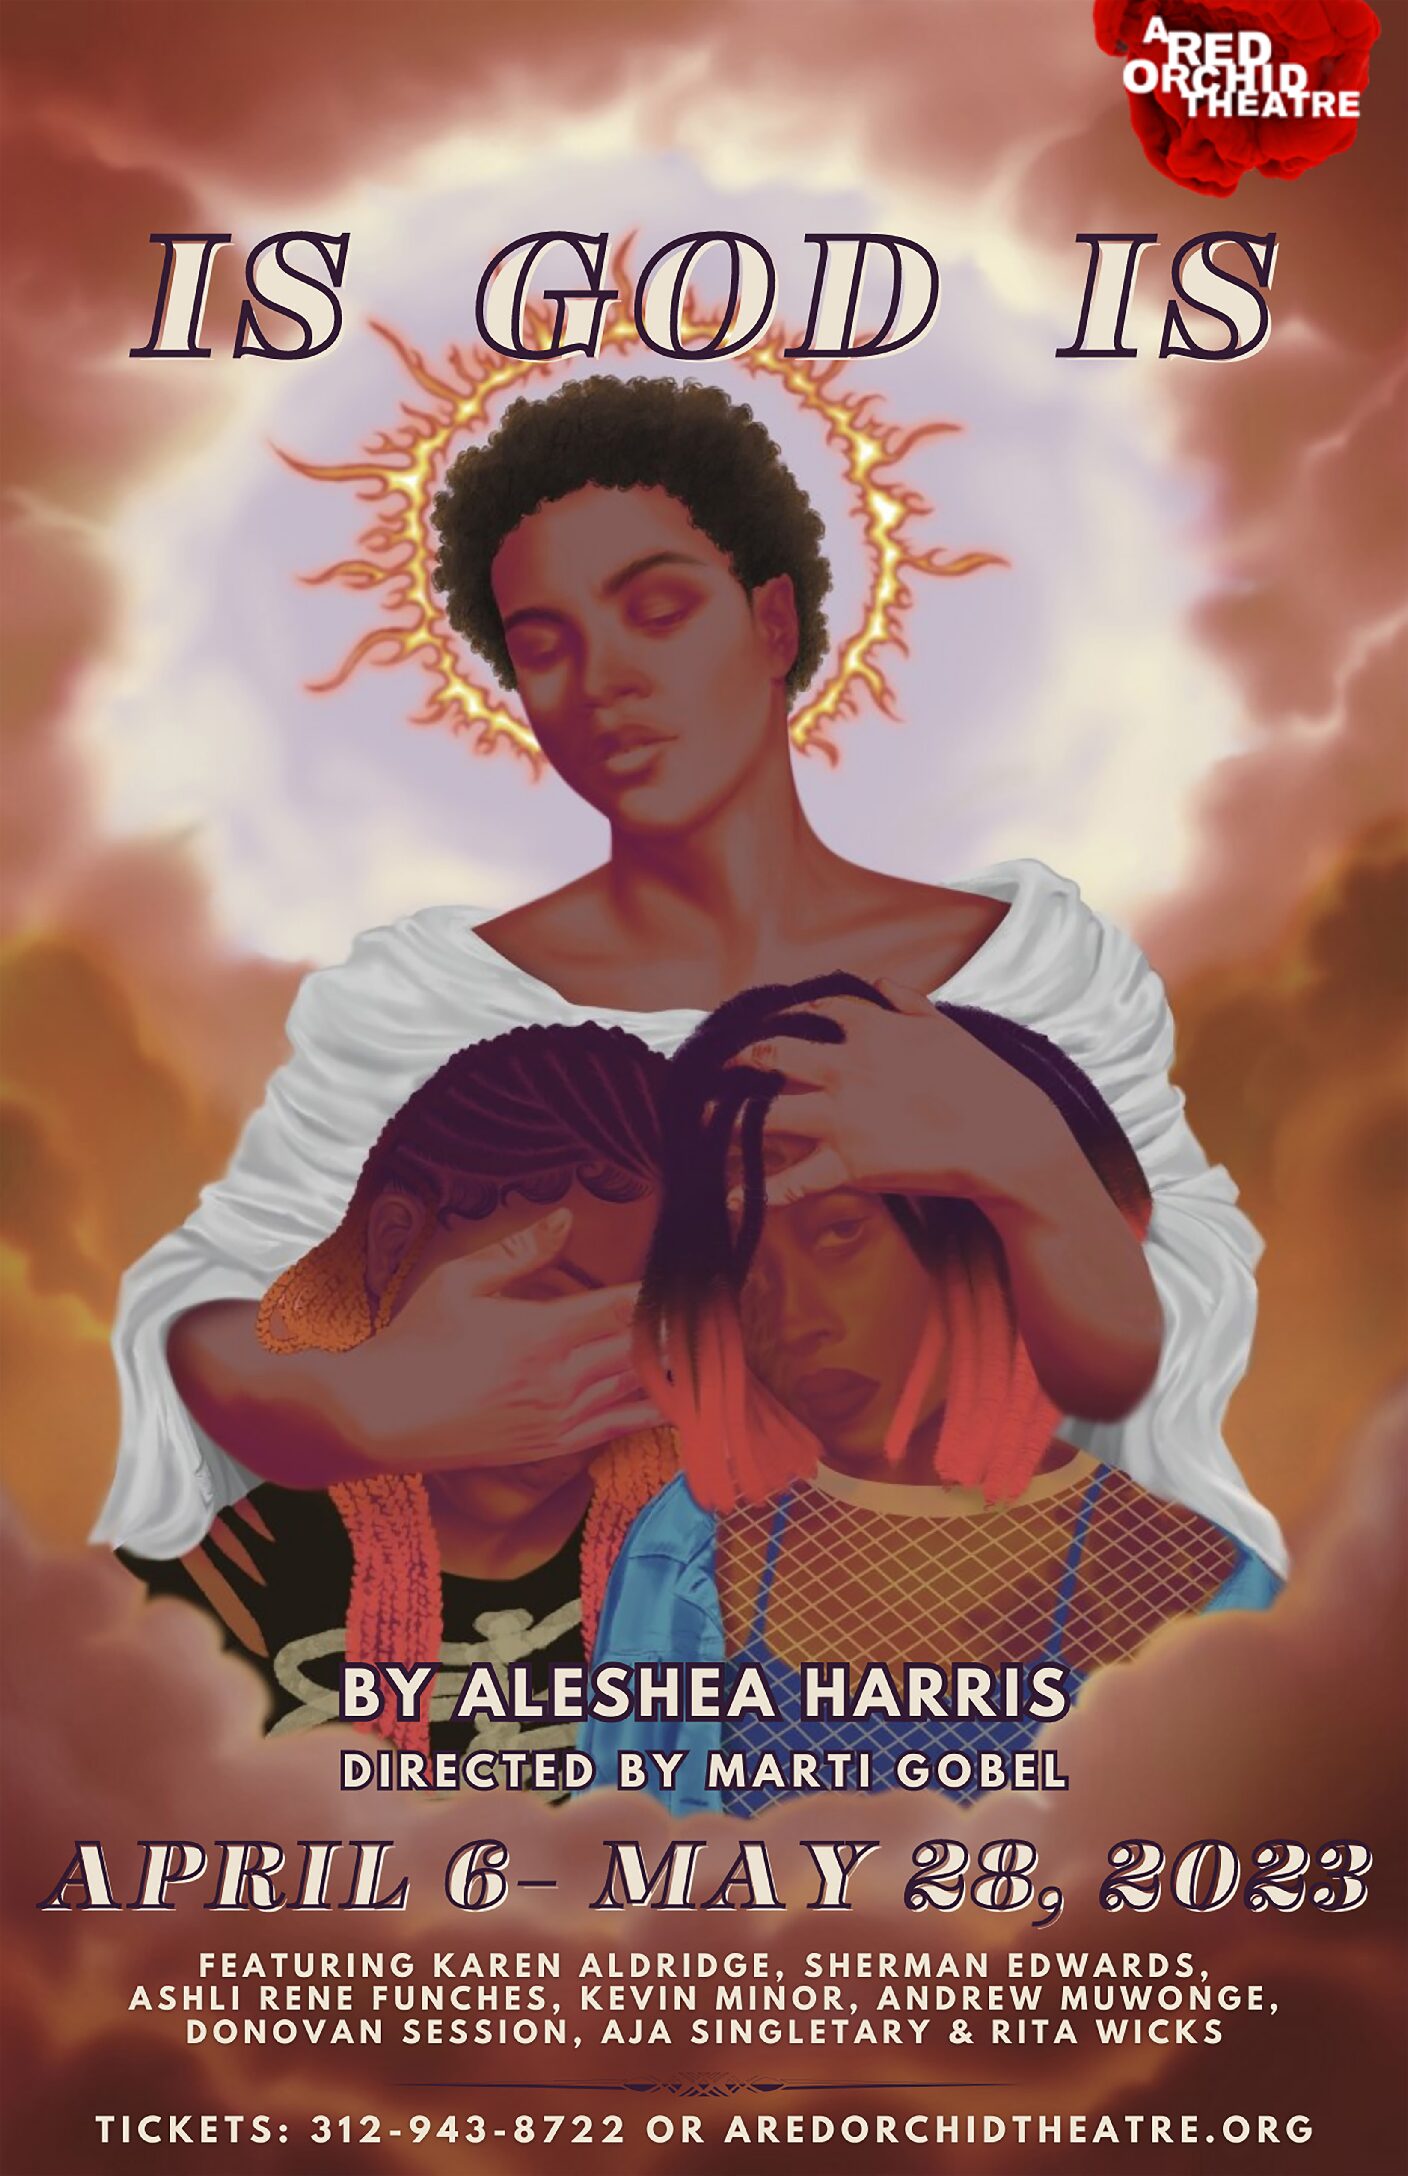 Written by Aleshea Harris
Directed by Marti Gobel
Featuring Ensemble Member Karen Aldridge
Performance Dates: April 6 – June 4, 2023
Press Performances: Saturday April 15
Industry Night: May 8 at 7pm
Open Captioned Performances: May 13 at 3pm & 7:30pm
Black-Out Performance: May 12 at 7:30pm
Audio Described Performance & Touch Tour: May 20 at 3pm
ASL Interpreted Performance: May 21 at 3pmChicago Premiere!When twins Racine and Anaia receive a letter from the mother they thought was dead, they swear to avenge her — and themselves — with blood. Their “mission from God” spans from the Dirty South to the California desert, from hip-hop to Afropunk, from ancient tragedy to the Spaghetti Western. Winner of the 2016 Relentless Award and the 2018 Obie Award for Playwriting, Is God Is asks us to consider the roots and futility of cyclical violence, and to question ourselves for wallowing so happily in stories that traffic in it.Run time: Approx. 1 hour & 40 minutes (no intermission)